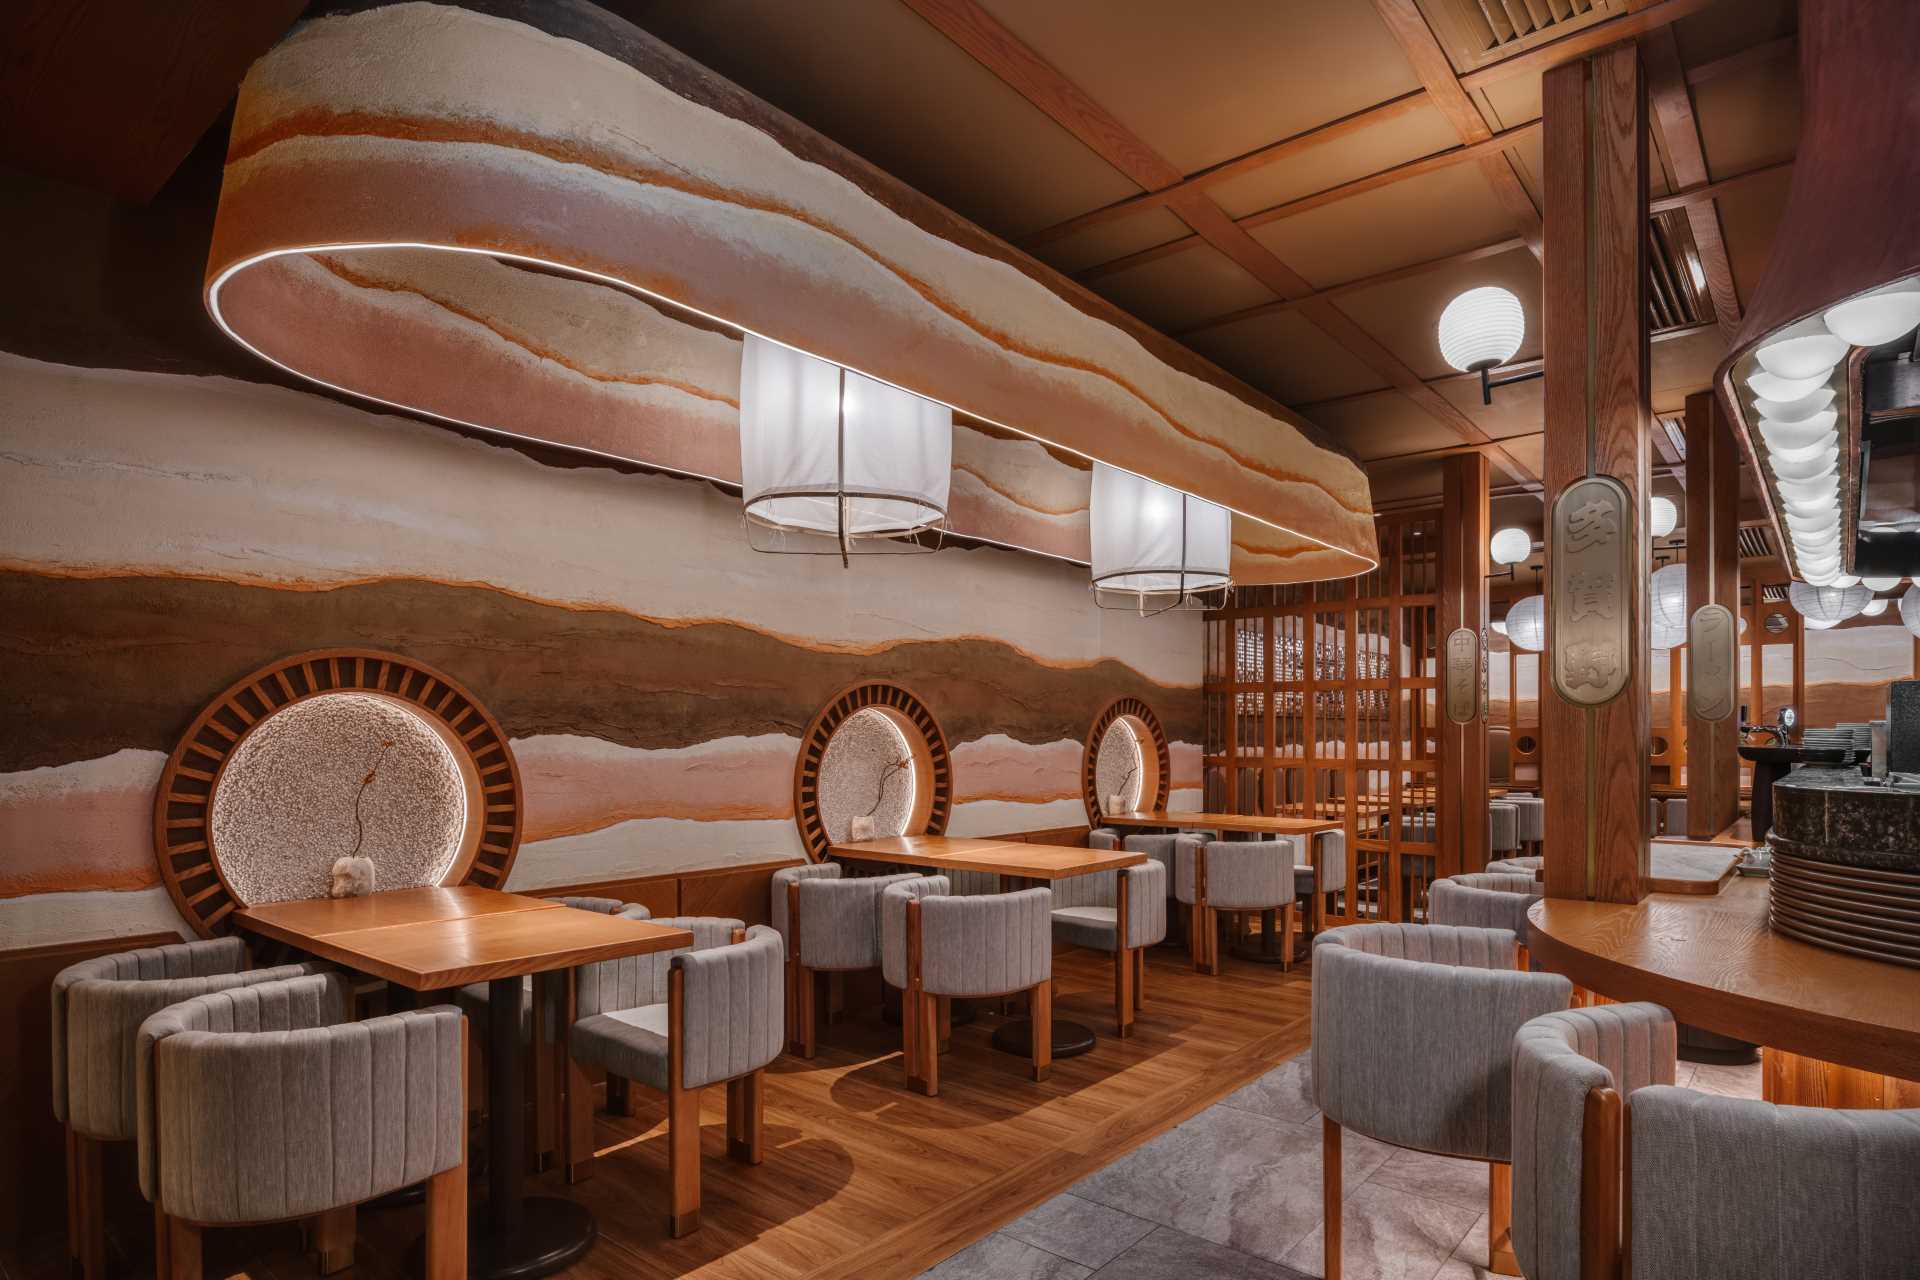 A Japanese restaurant in Hong Kong named "Takano Ramen", whose design is inspired by Japanese mansion houses and layers of clay.